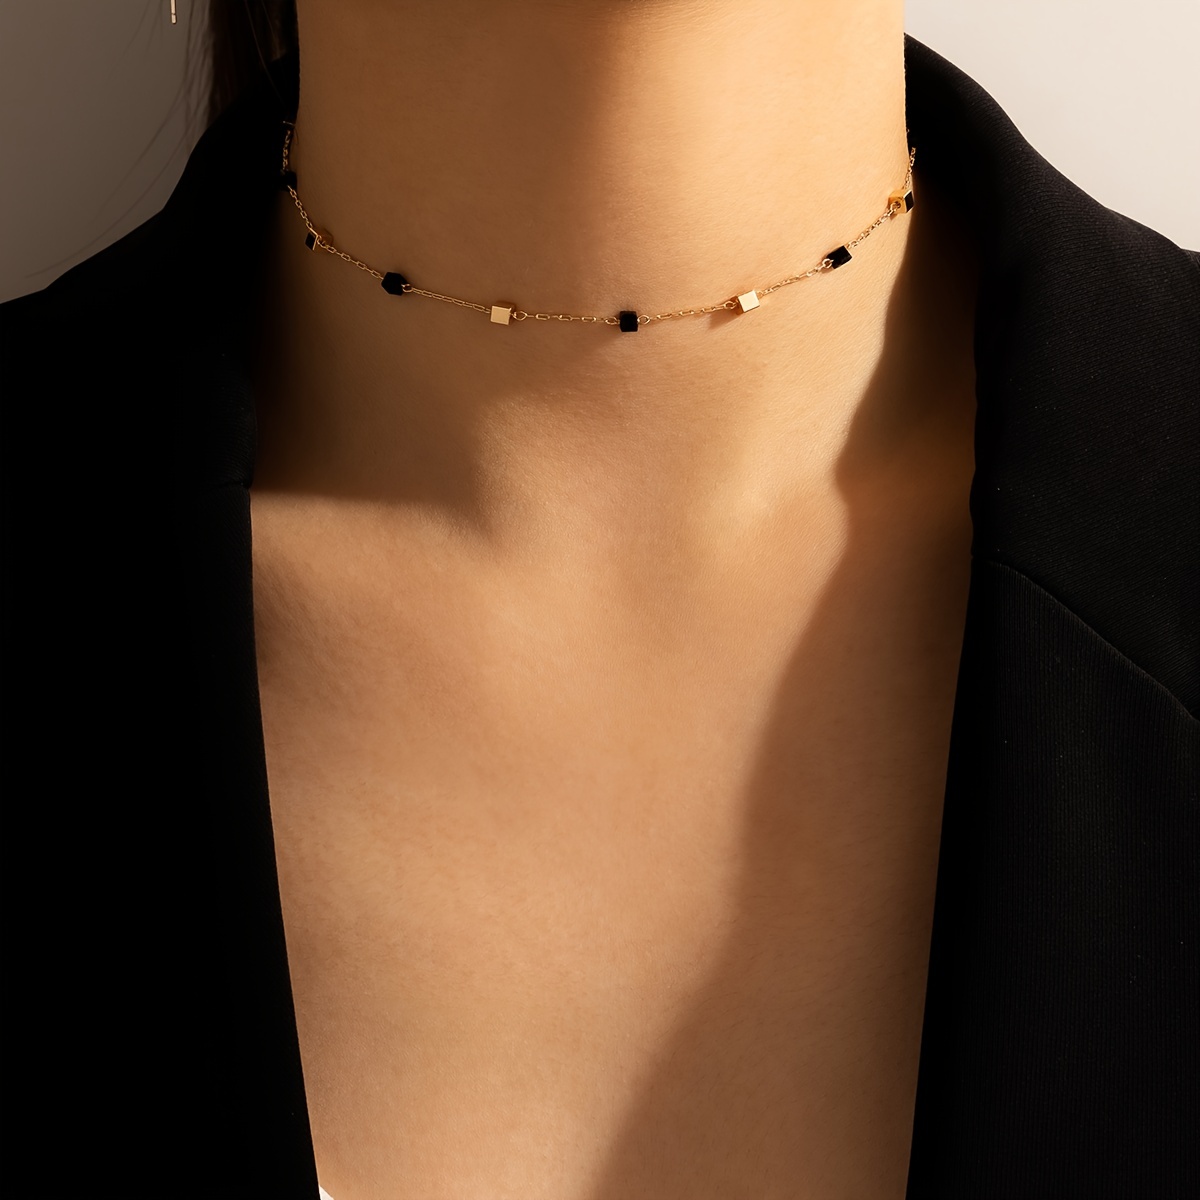 'Dainty Choker Necklace | Square Beads | Adjustable Neck Chain | Short Clavicle Chain'